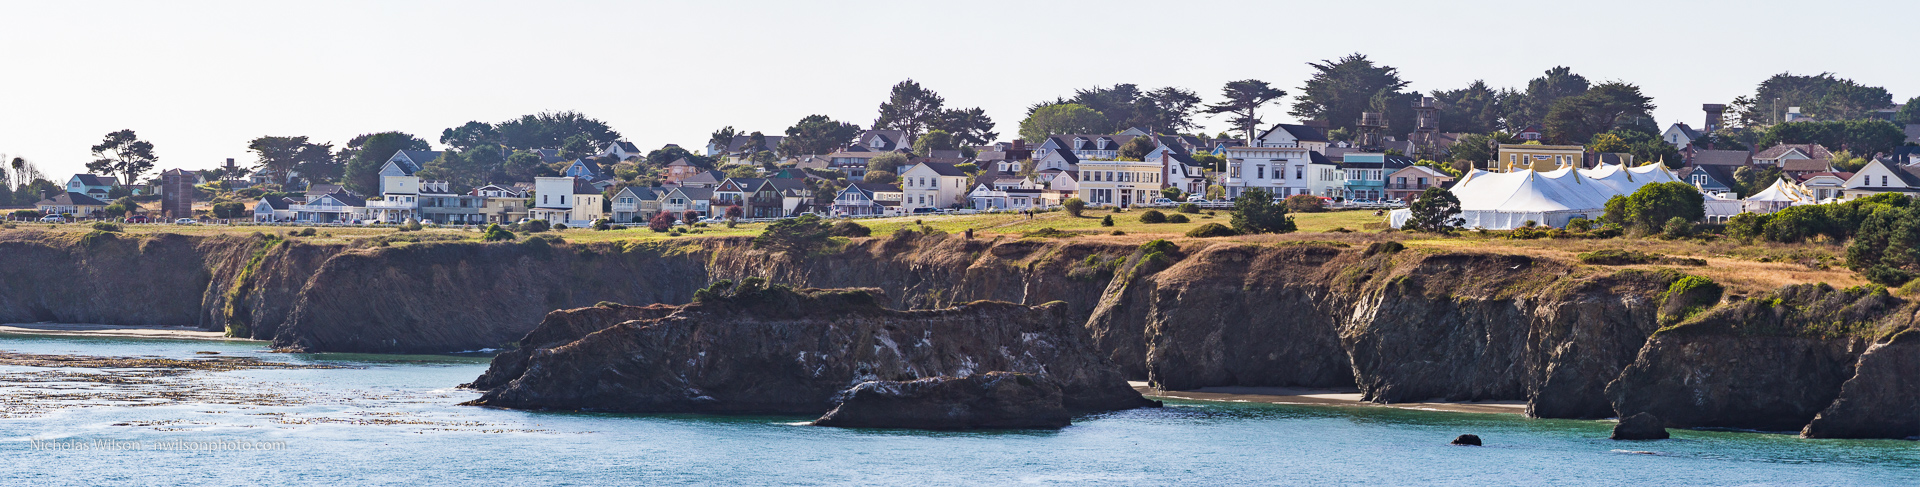 Panoramic view of Mendocino across Mendocino Bay. The music festival's big top tent has been a landmark every July since 1986.